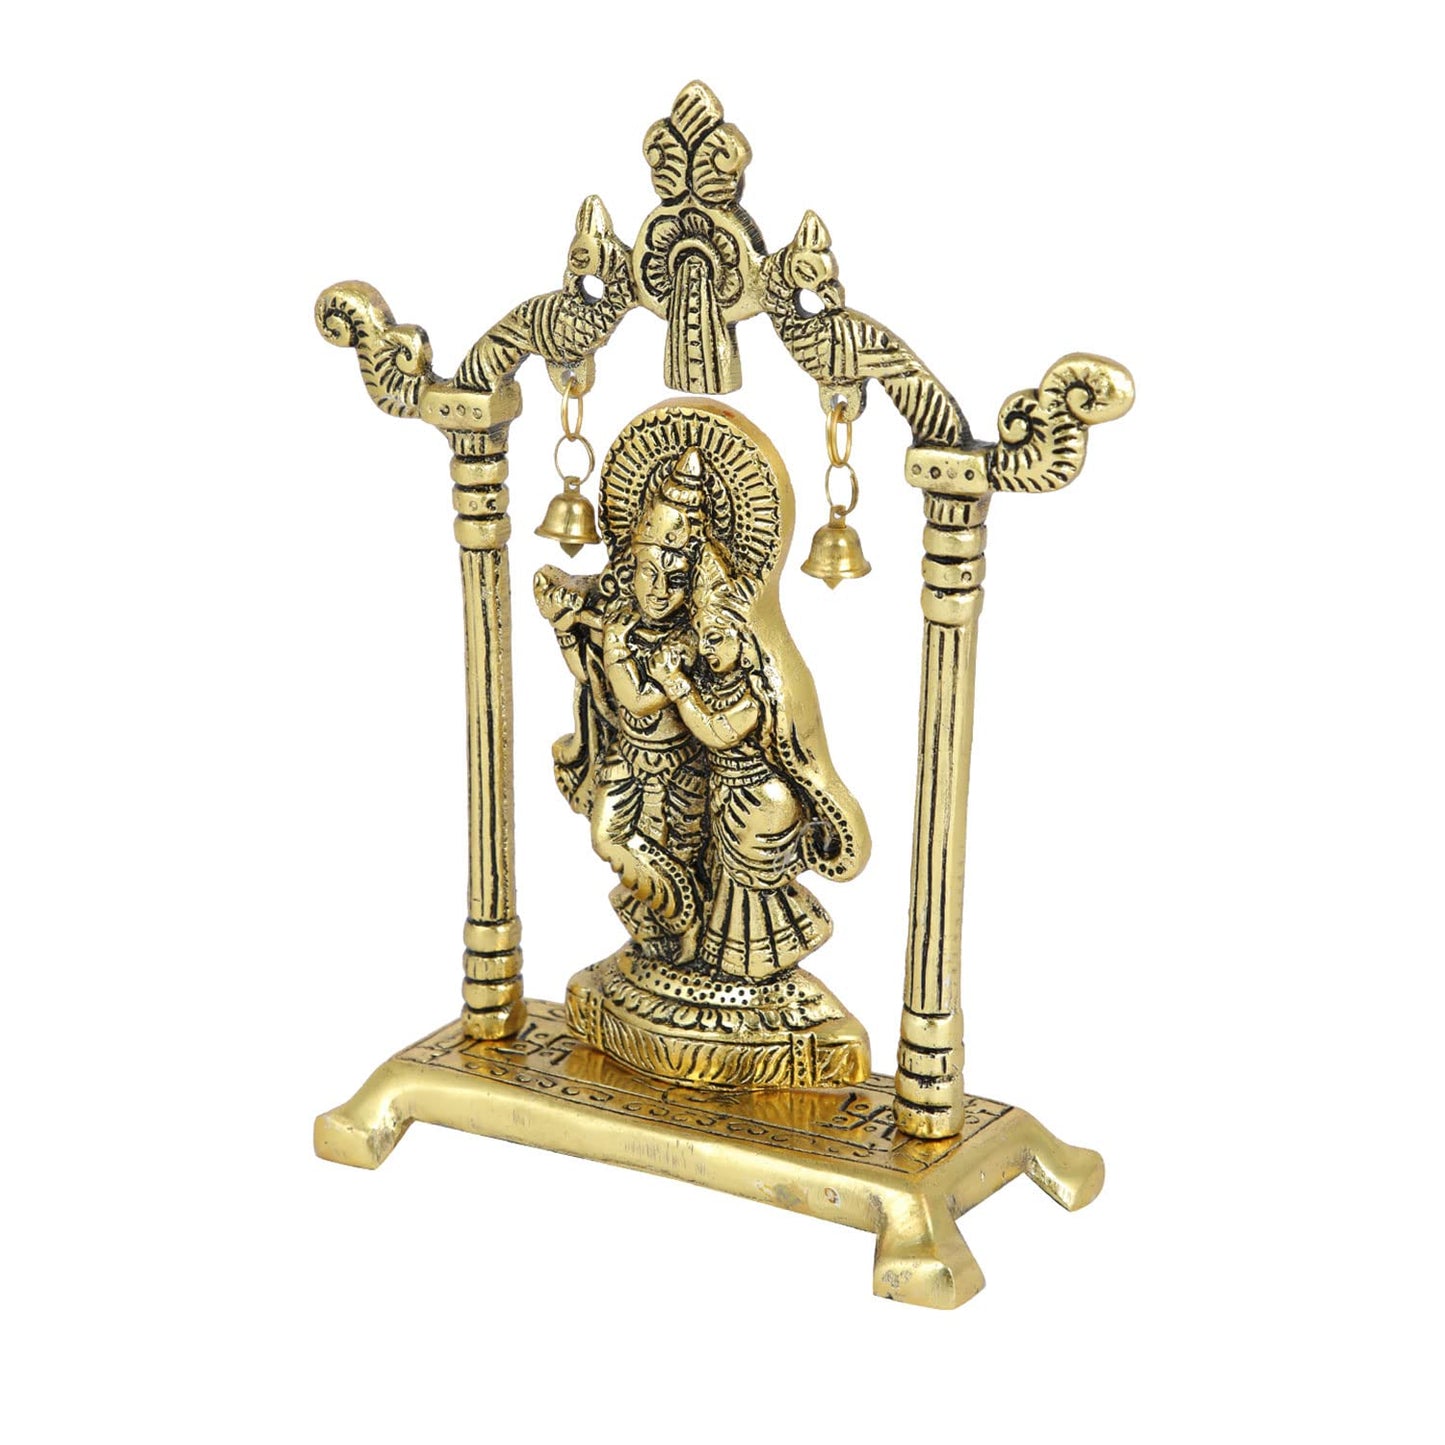 Metal Gold Plated Radha Krishna Idol Sculpture Statue Figurine Decorative Showpiece for Janmashtami Home Decoration Temple and Gift (1 Pieces)